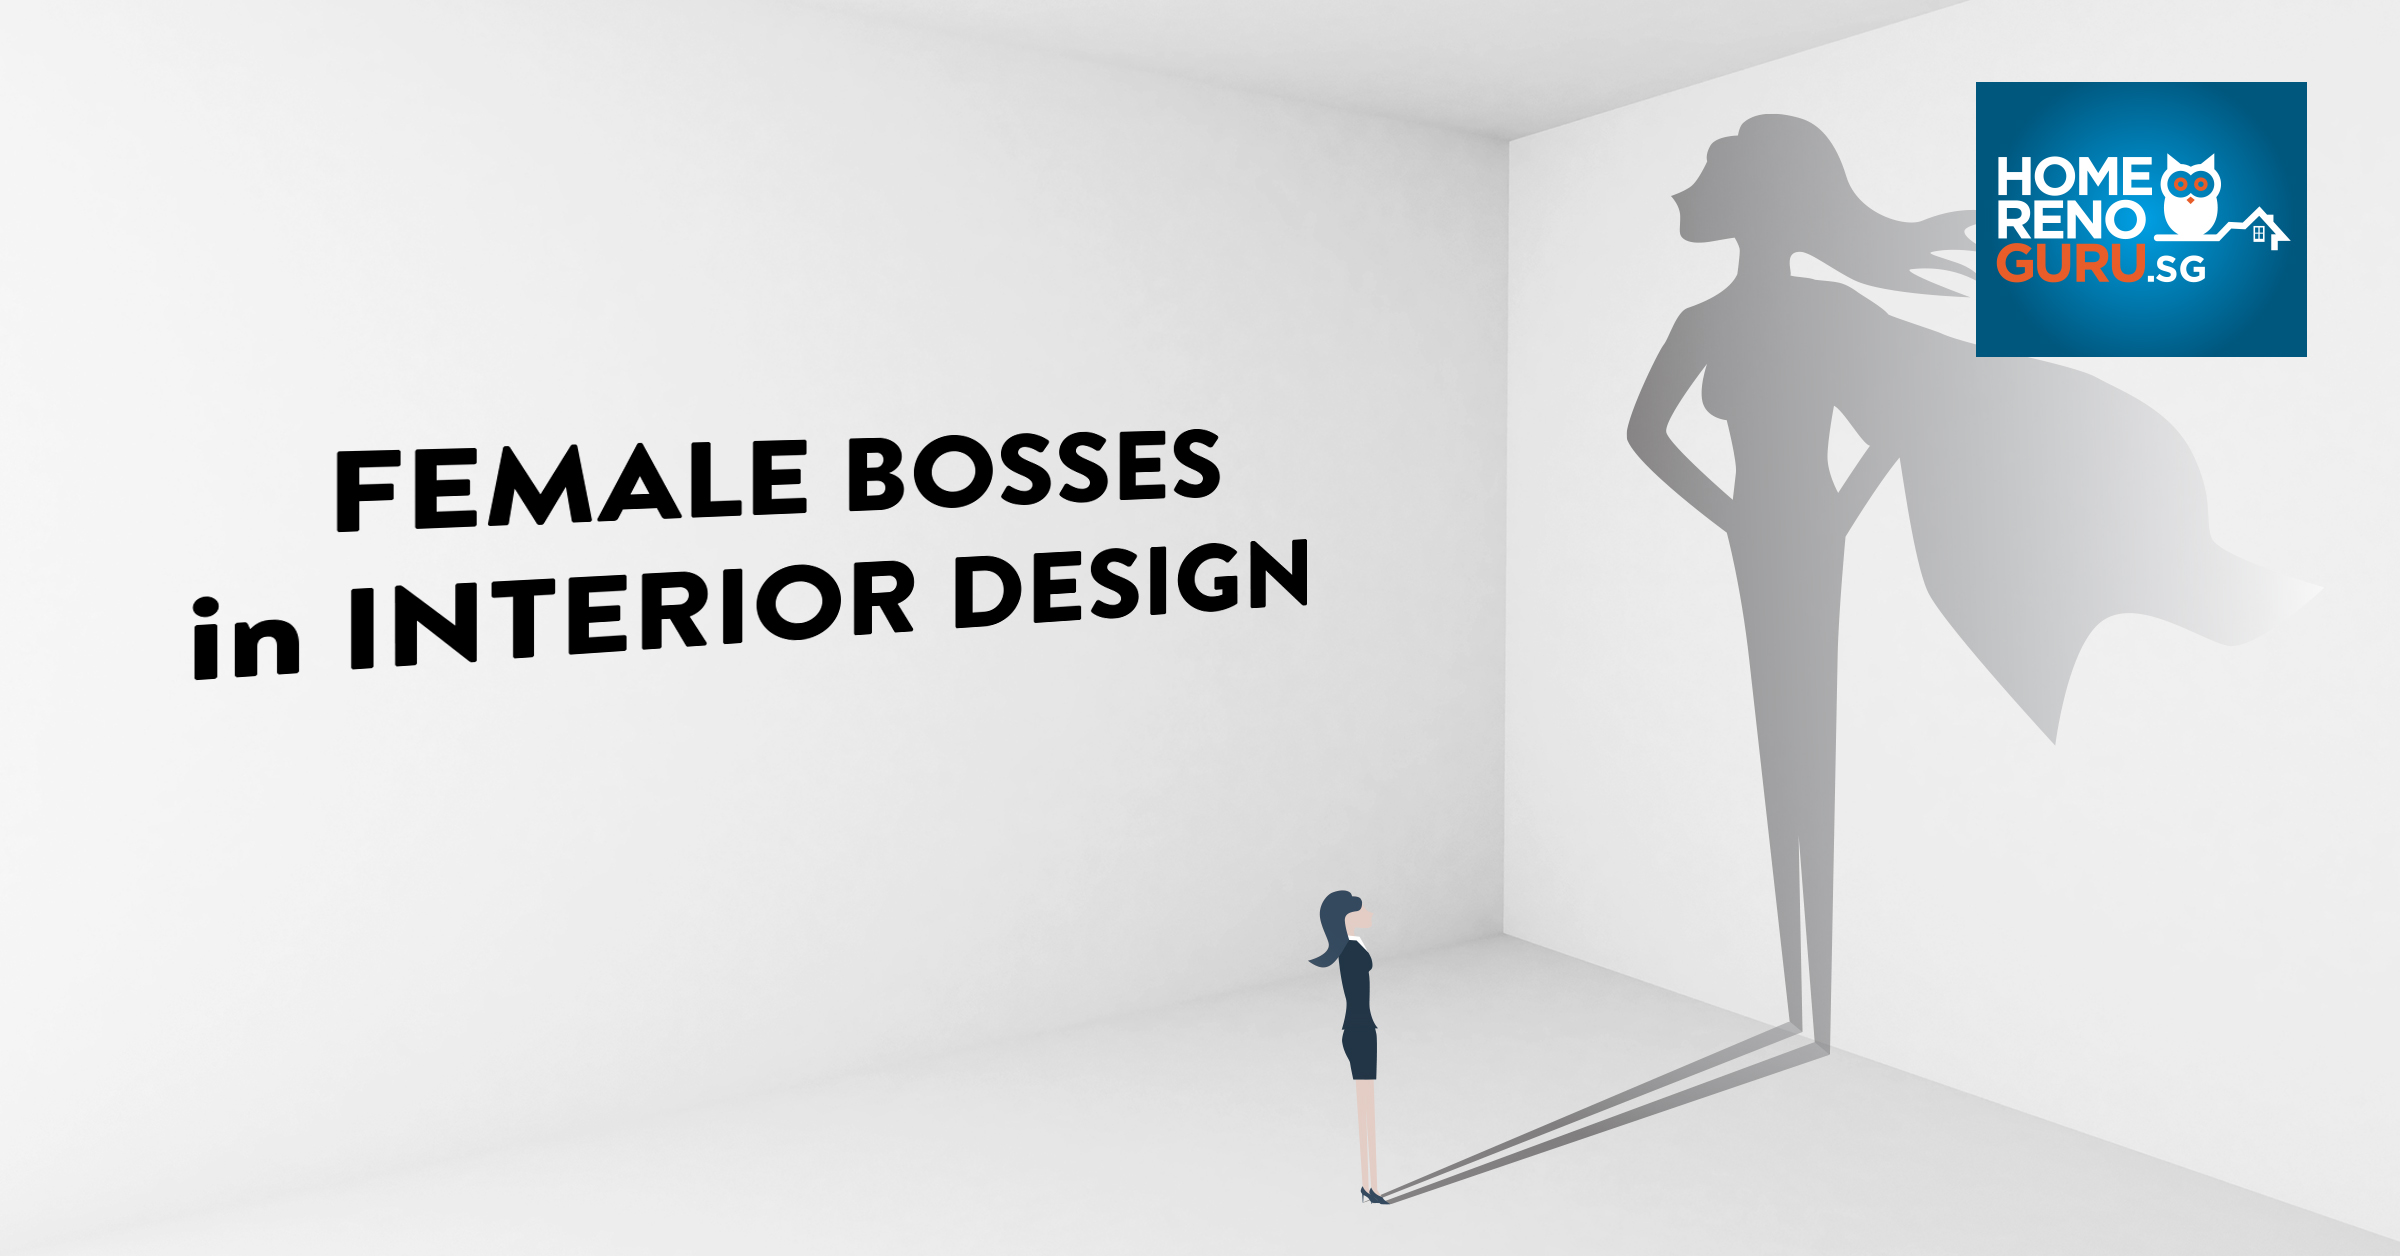 Introducing the Lady Bosses of Singapore’s Interior Design Sector